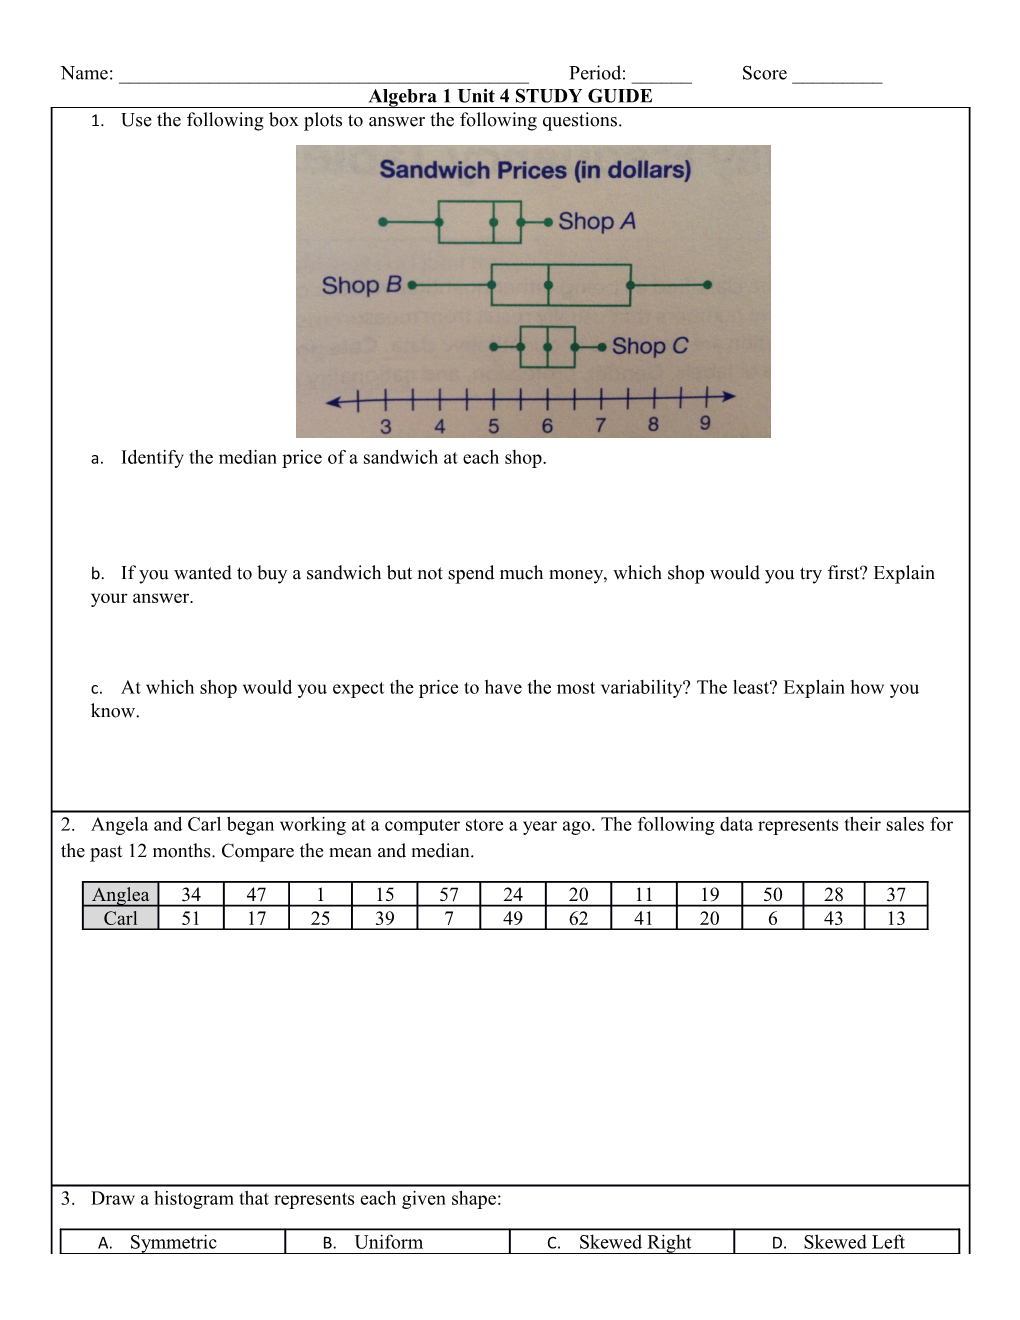 Use the Following Box Plots to Answer the Following Questions